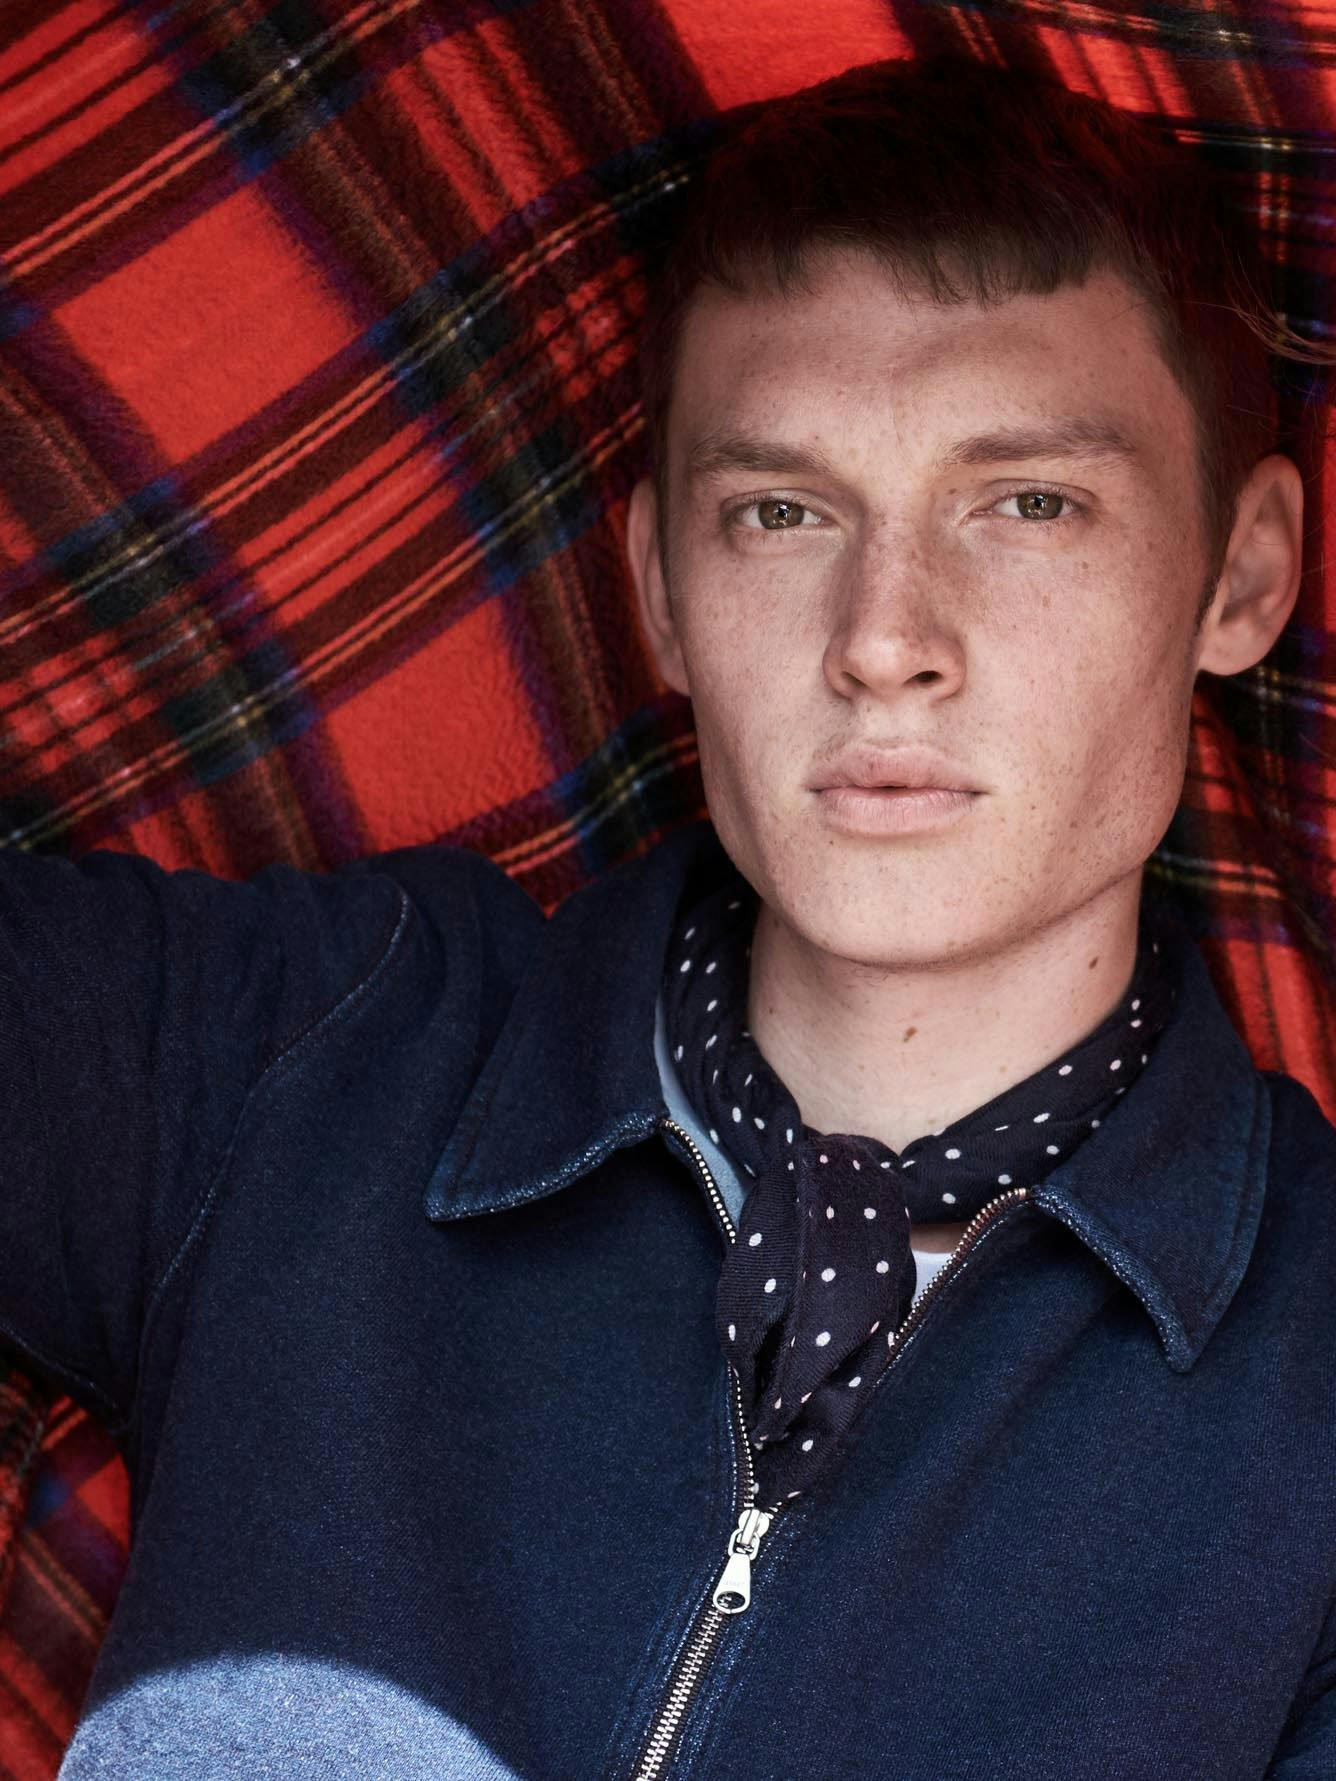 Male Model Wearing a navy neckerchief with white spots and a navy sports code holding a red tartan blanket behind him